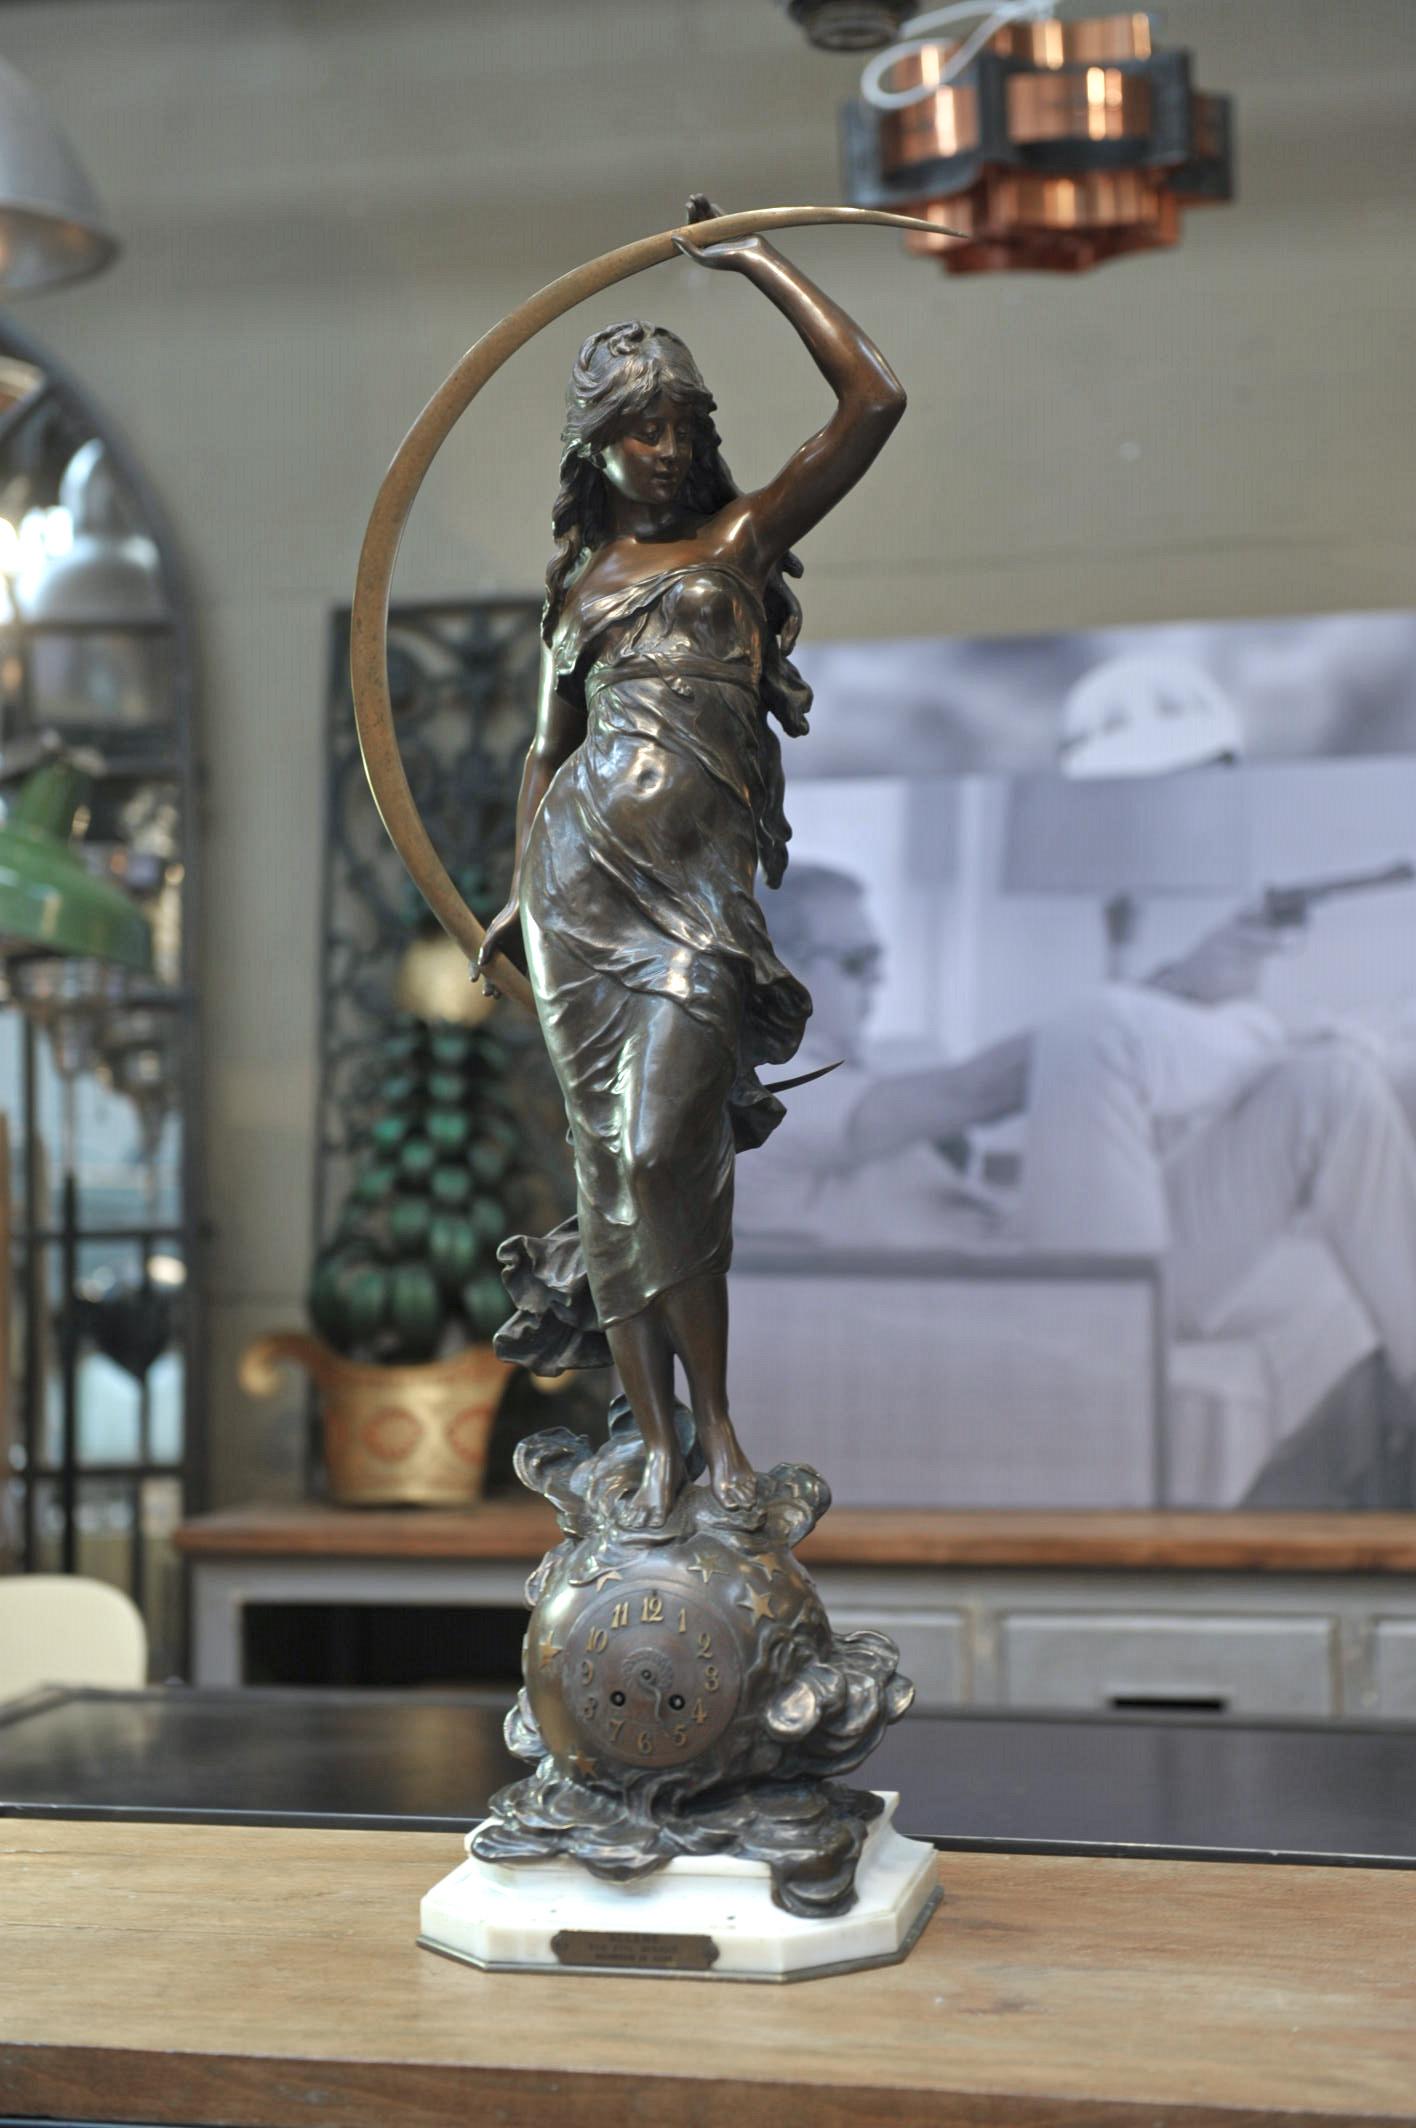 Bronze sculpture with brown patina including a clock and signed Auguste Moreau. It features a woman wearing a flowing dress who is standing on a globe and holding a waning crescent moon in her hands. The title printed on a small plaque reads: